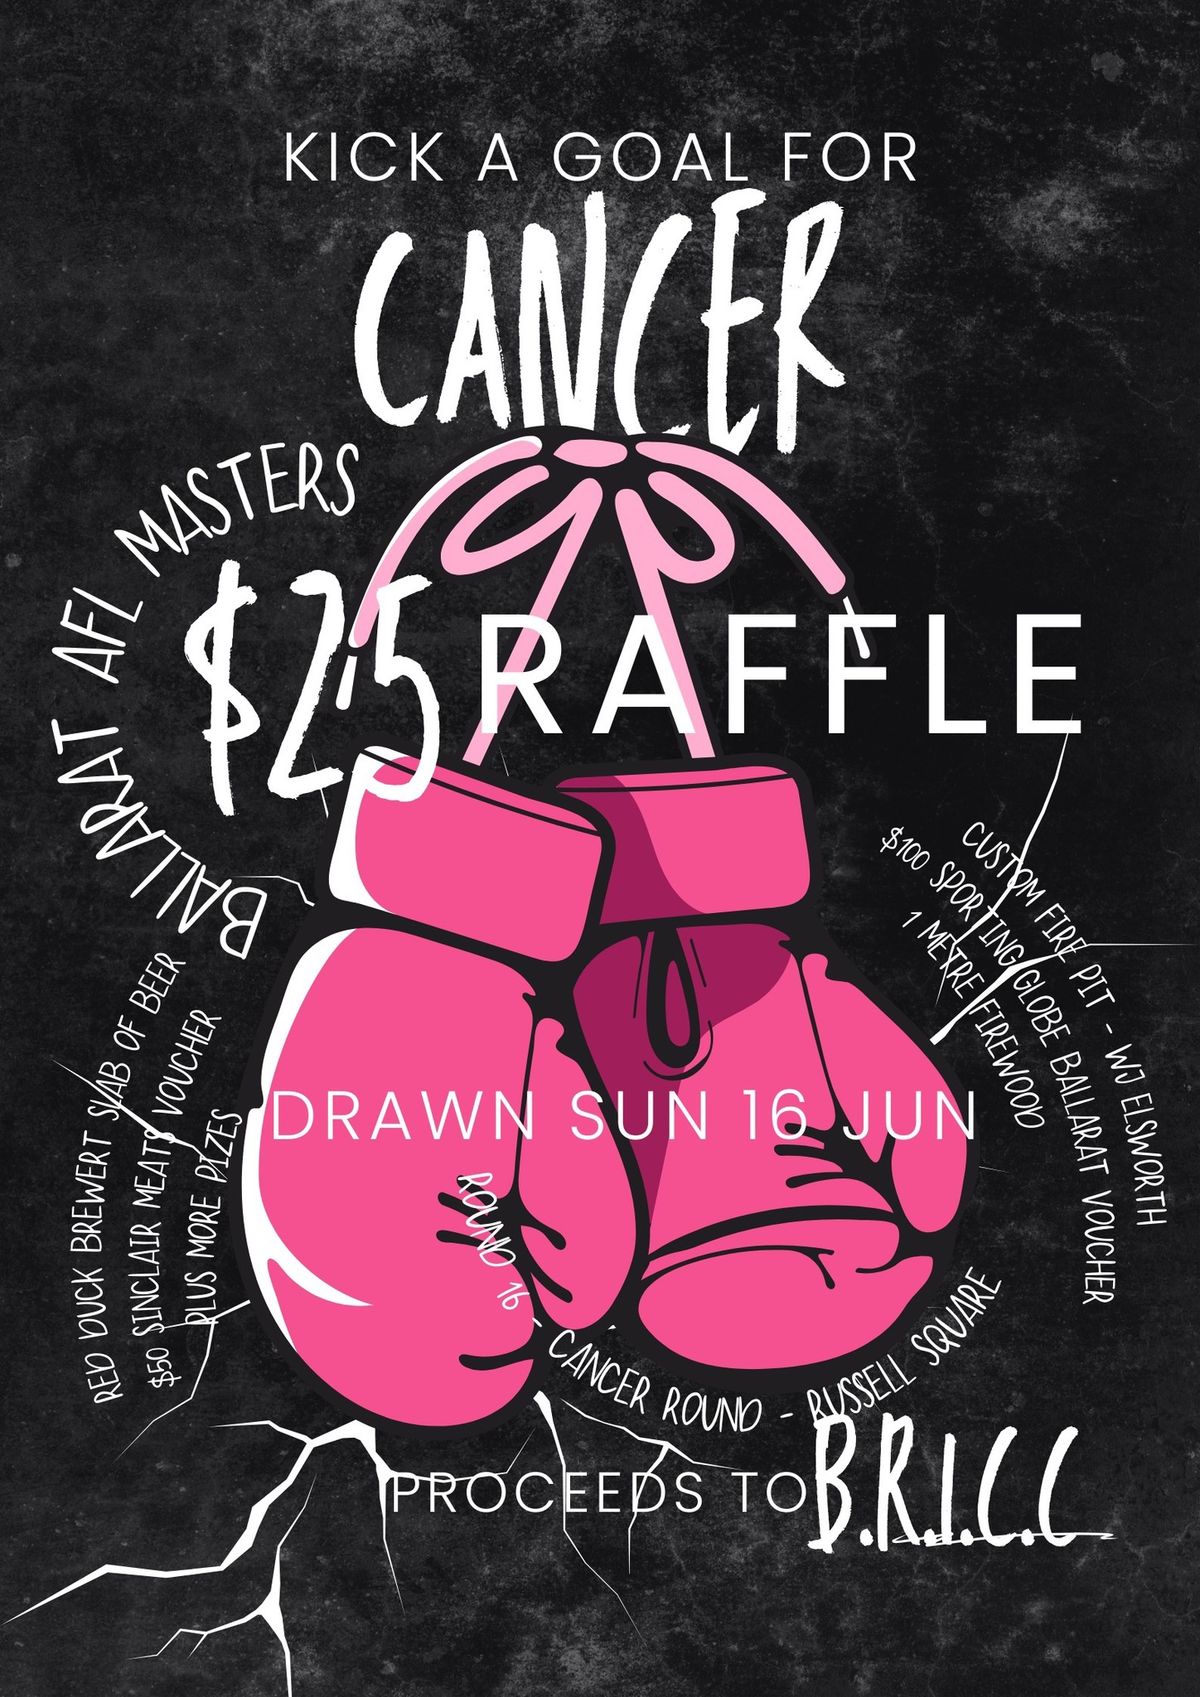 Kick Cancer for a Goal Raffle Draw $25